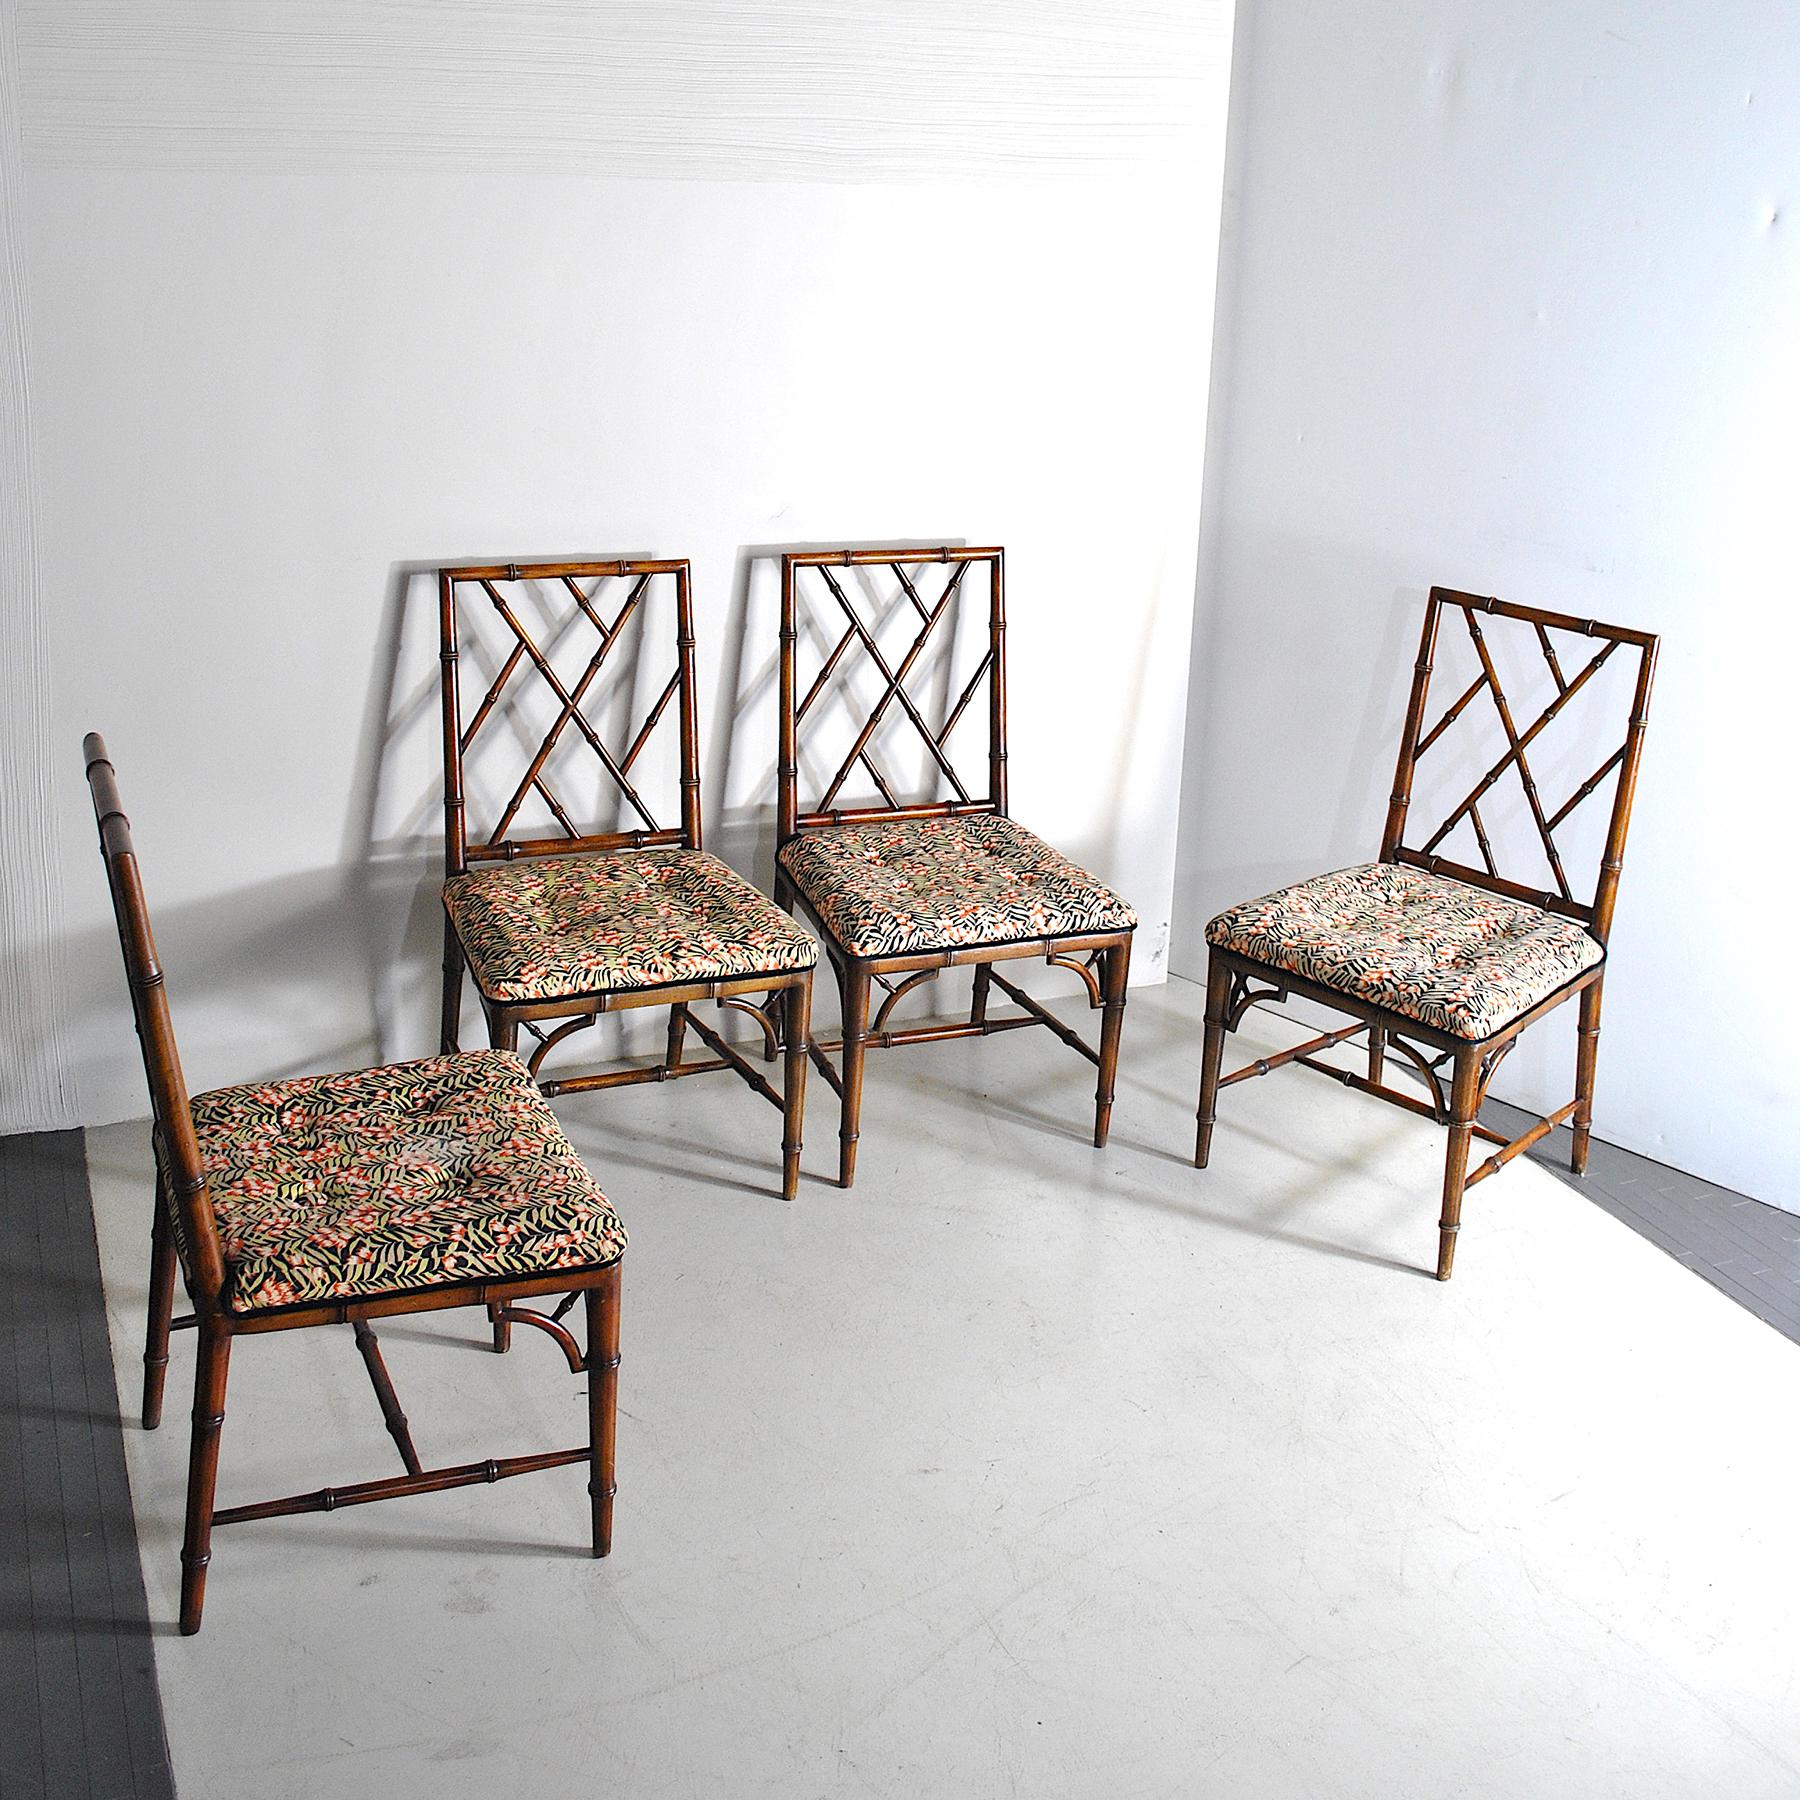 Mid-20th Century Italian Midcentury Set of 4 Chairs in Bamboo